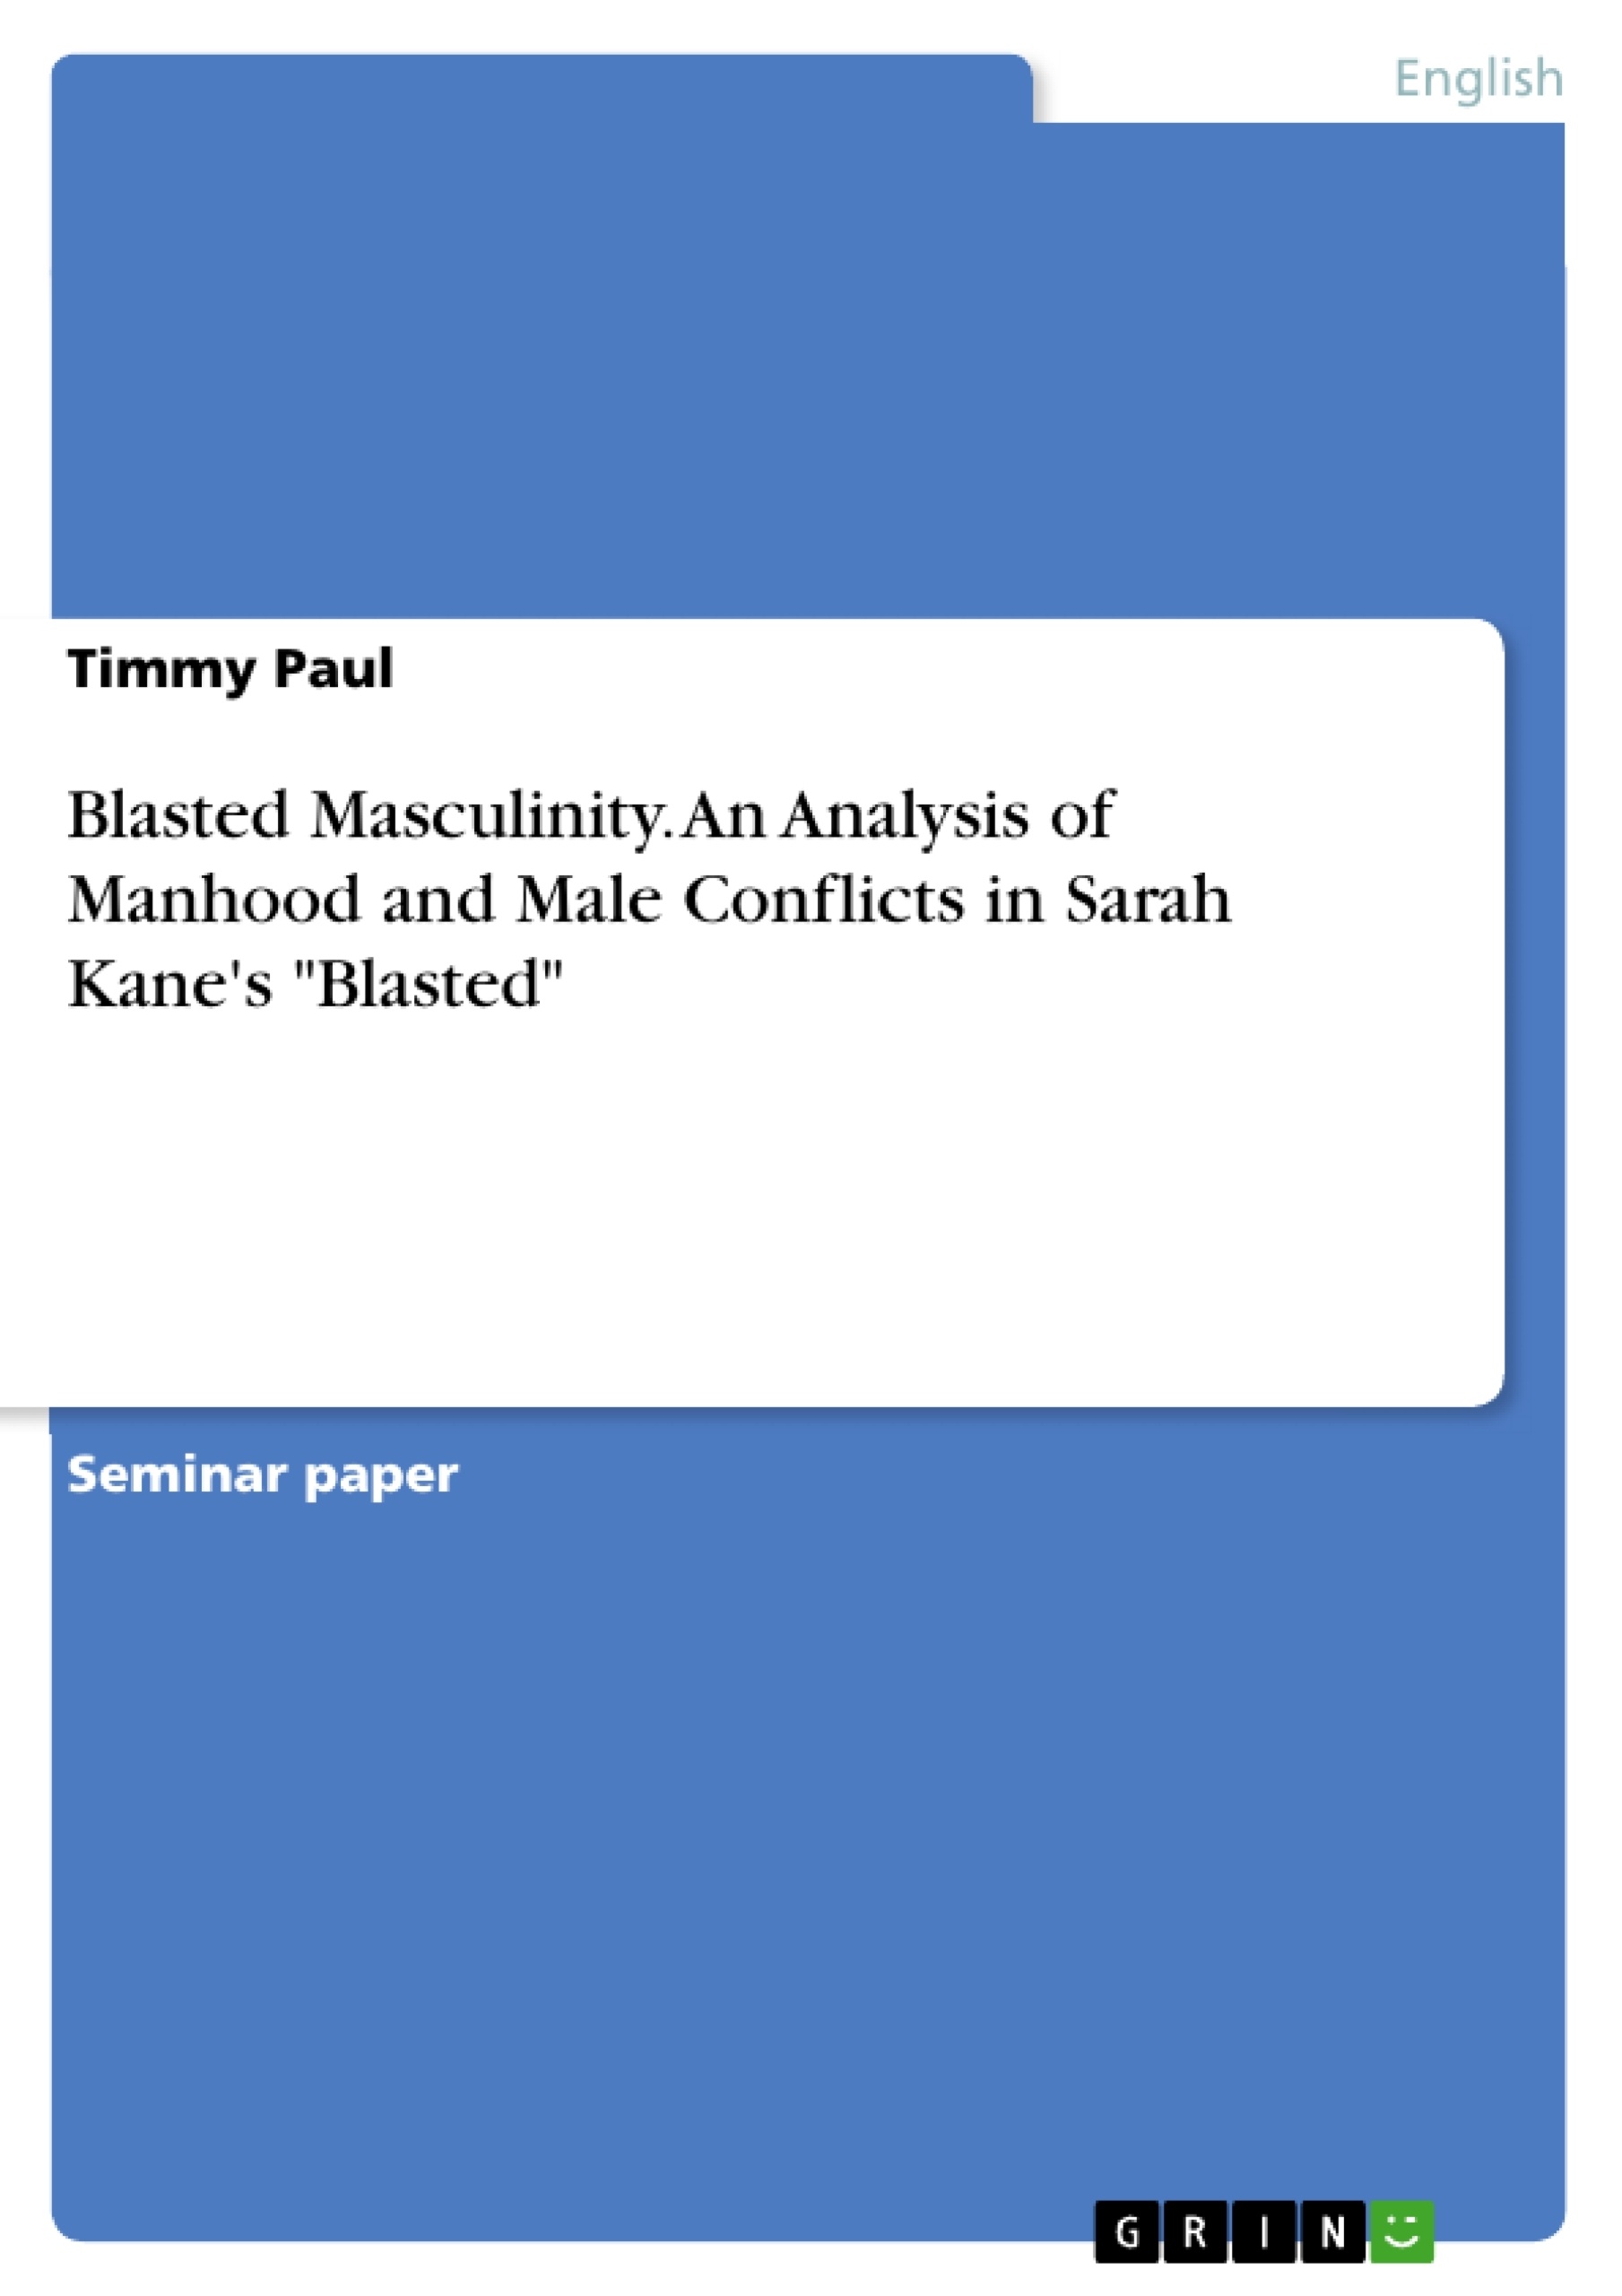 Title: Blasted Masculinity. An Analysis of Manhood and Male Conflicts in Sarah Kane's "Blasted"